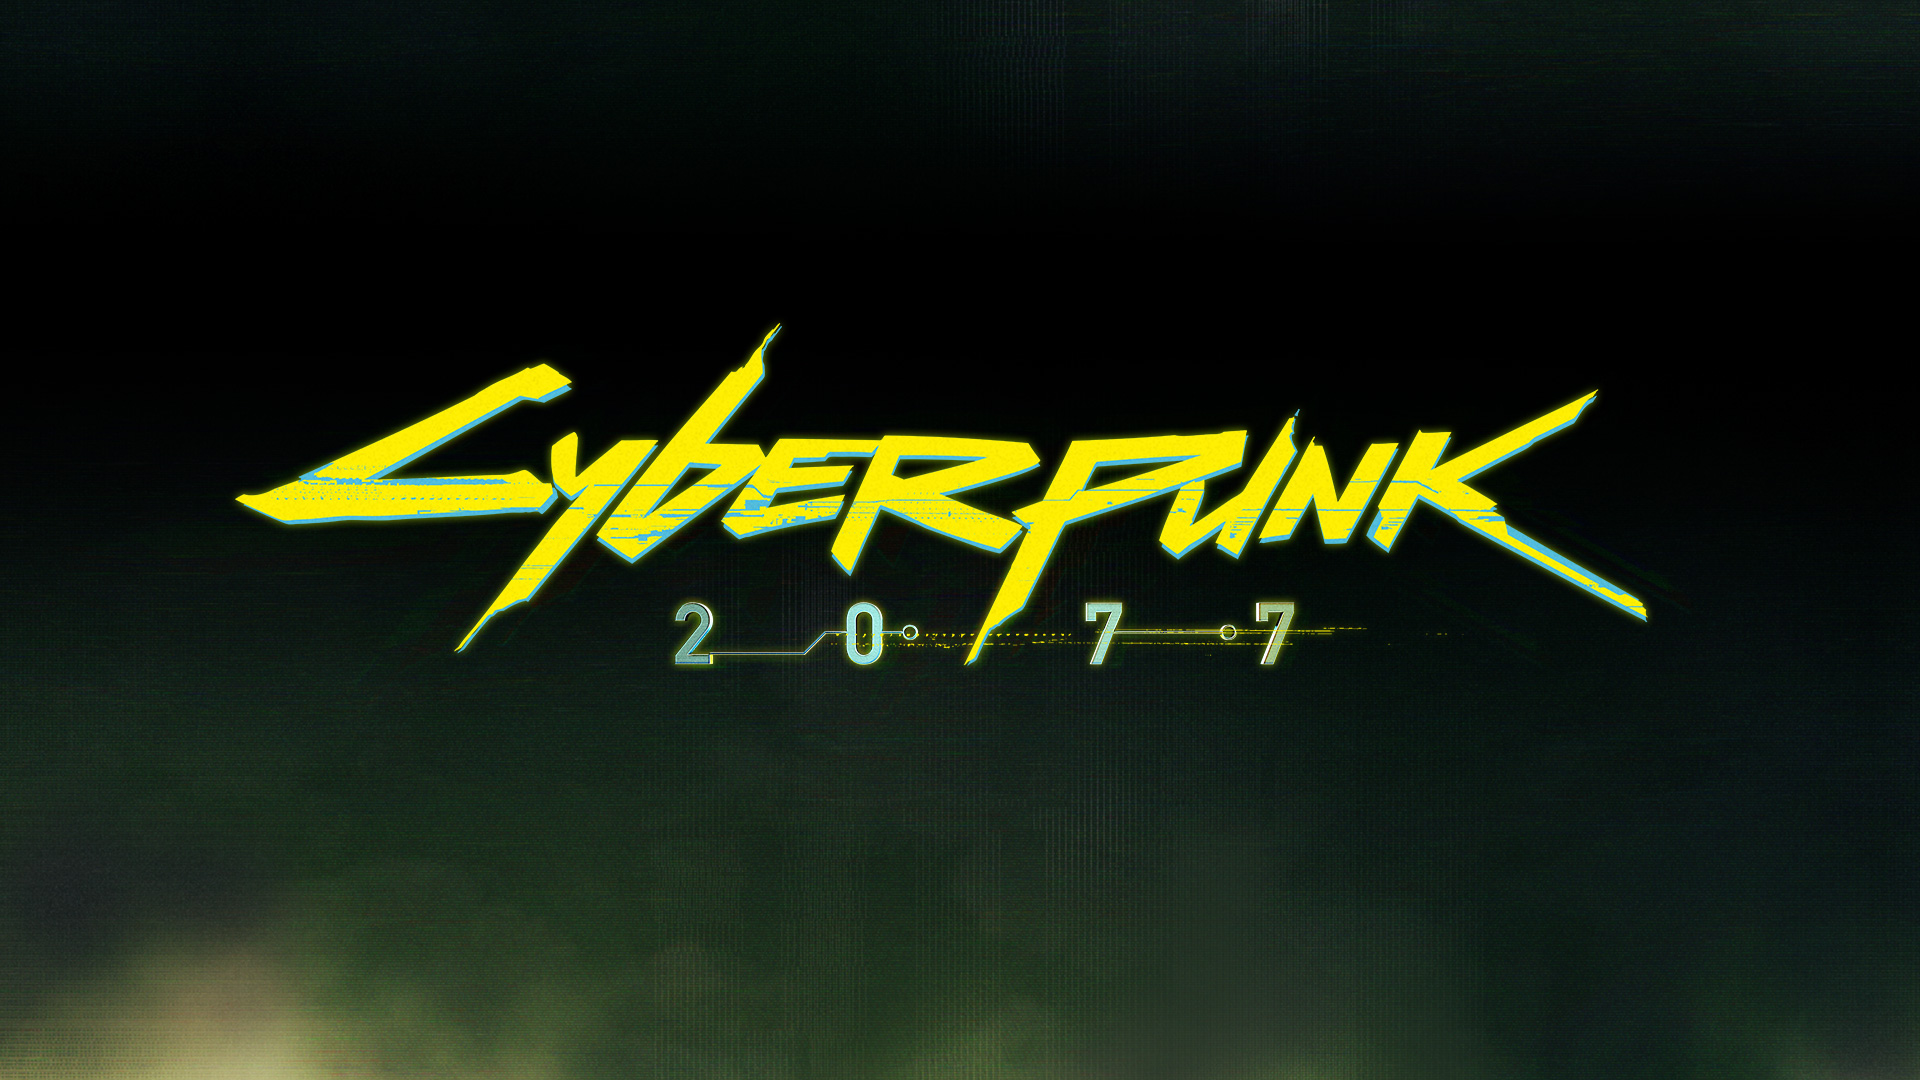 CD Projekt Red will stream more Cyberpunk 2077 gameplay in August